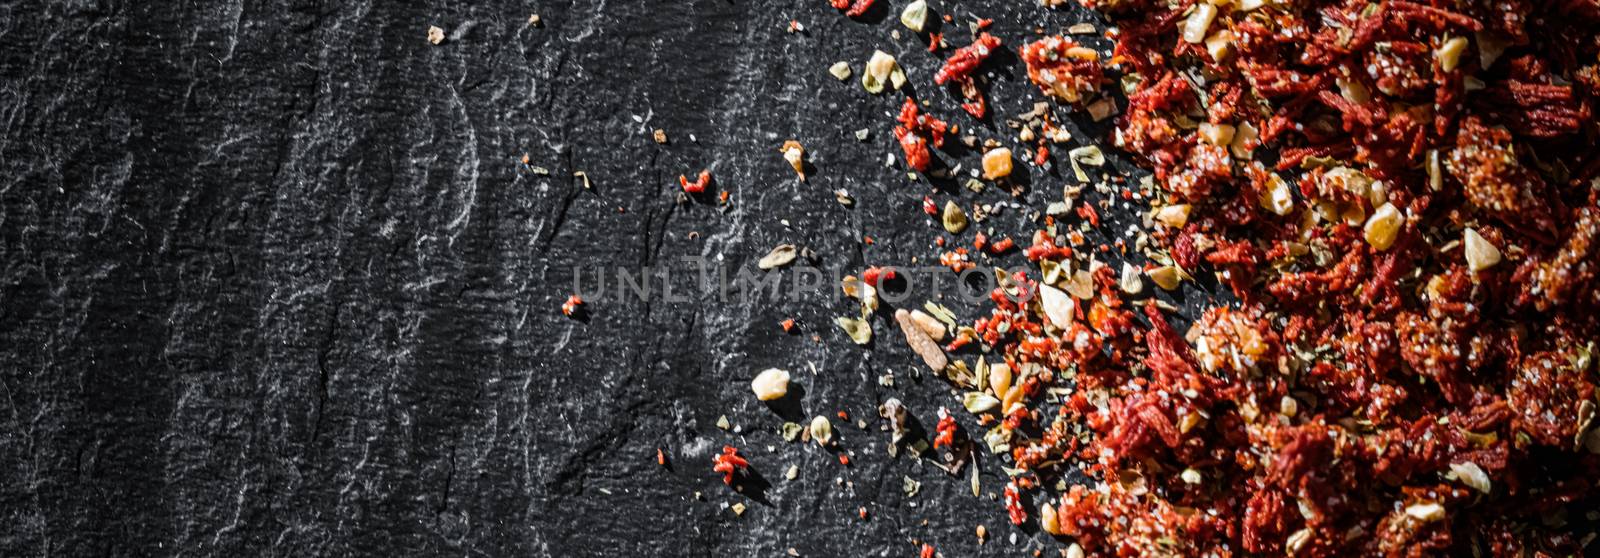 Dried tomato and chili pepper closeup on luxury stone background as flat lay, dry food spices and recipe ingredients